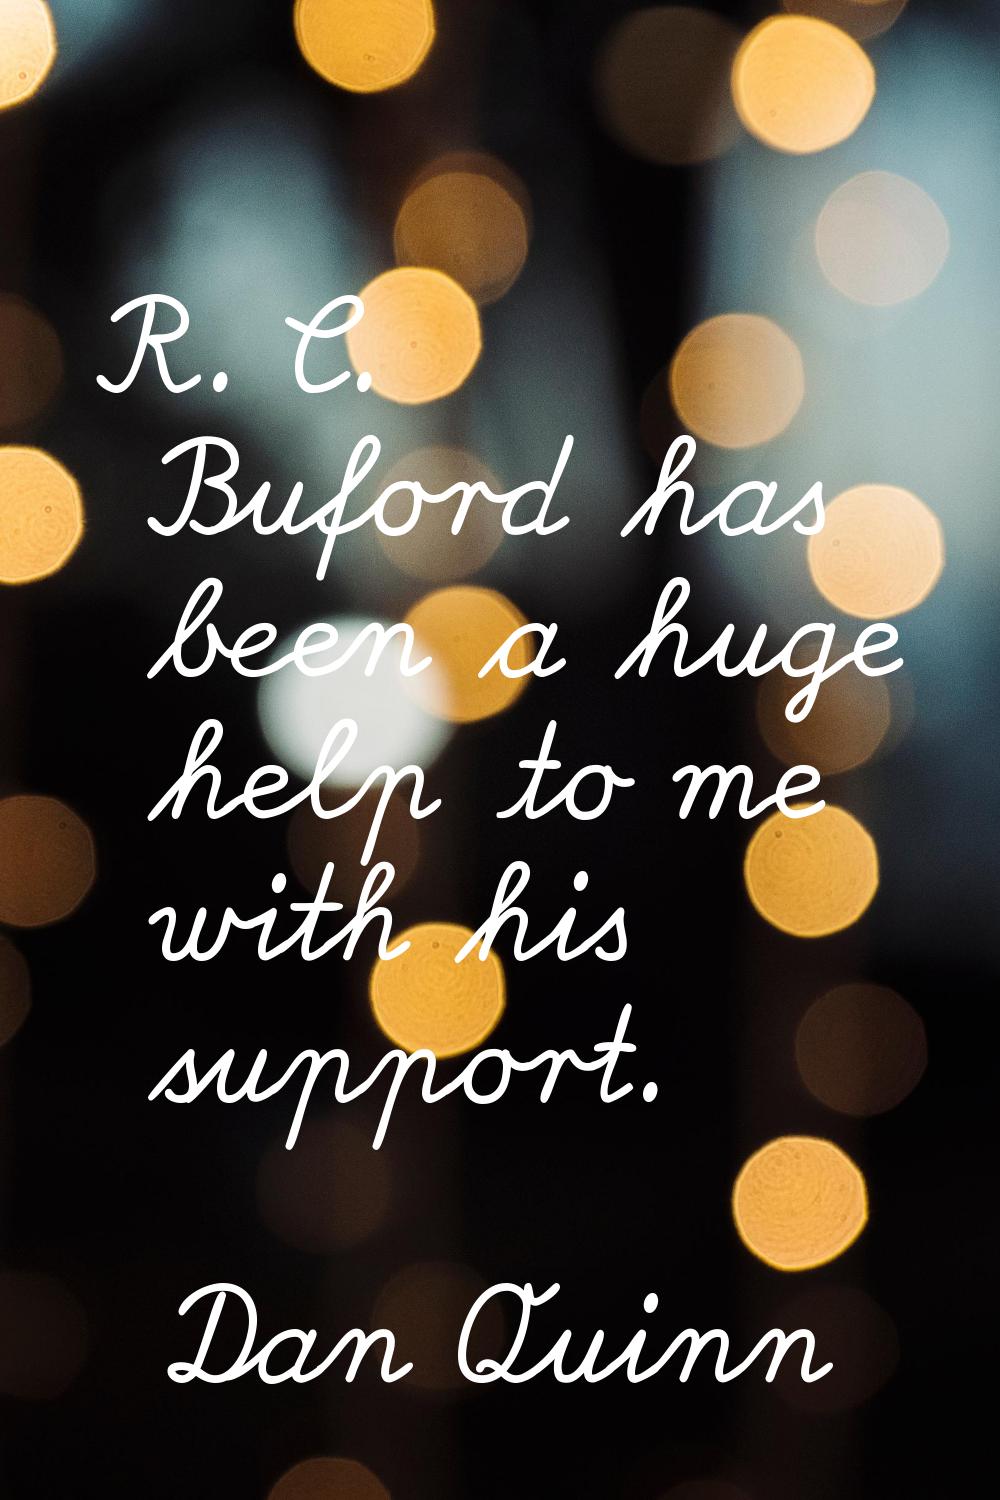 R. C. Buford has been a huge help to me with his support.